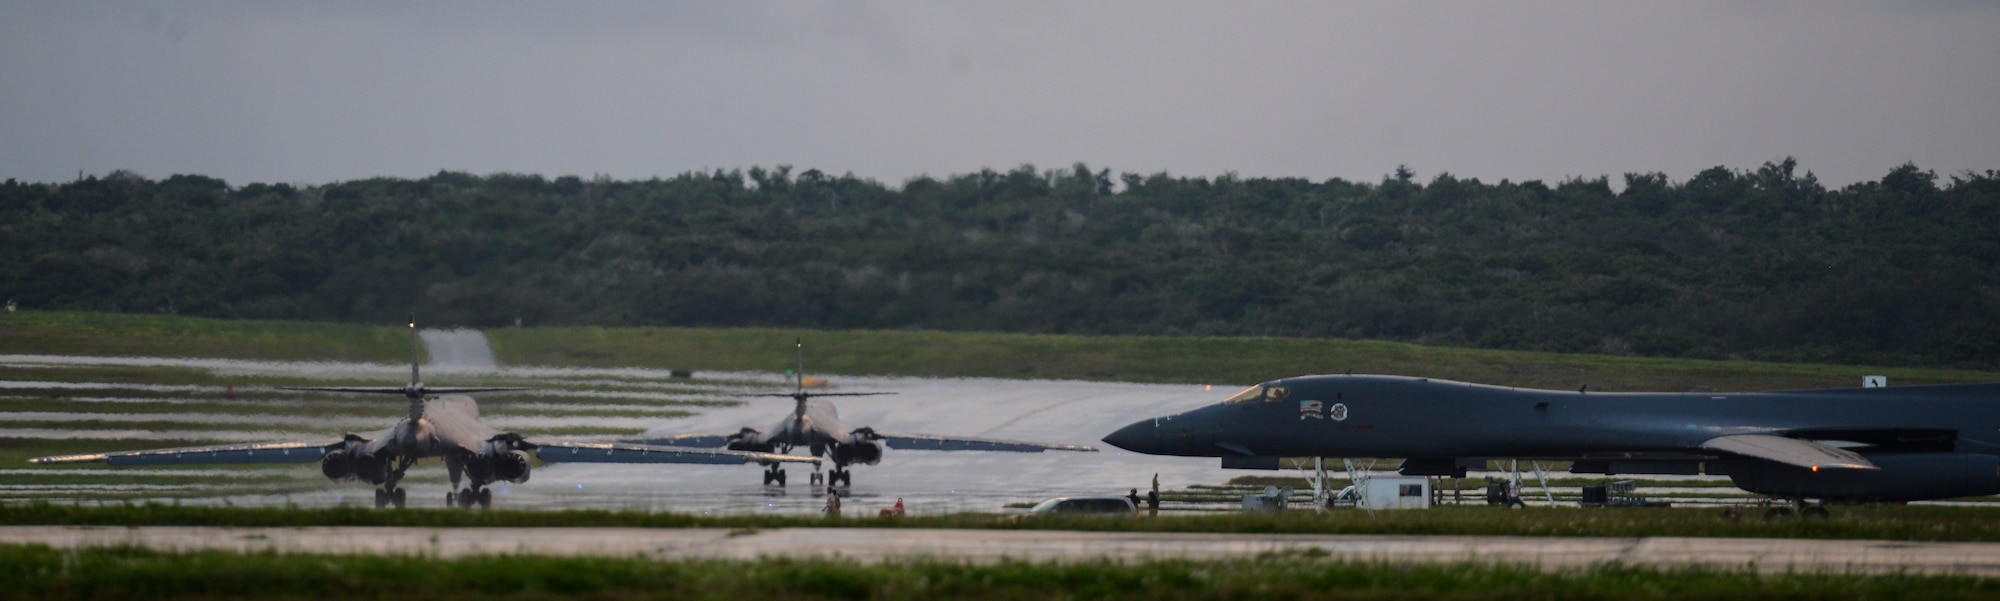 A U.S. Air Force B-1B Lancer assigned to the 34th Expeditionary Bomb Squadron, deployed from Ellsworth Air Force Base, S.D., prepares to takes off Oct. 25, 2016, at Andersen AFB, Guam. The aircraft is deployed in support of the U.S. Pacific Command’s Continuous Bomber Presence operations. (U.S. Air Force photo by Senior Airman Arielle Vasquez/Released)
